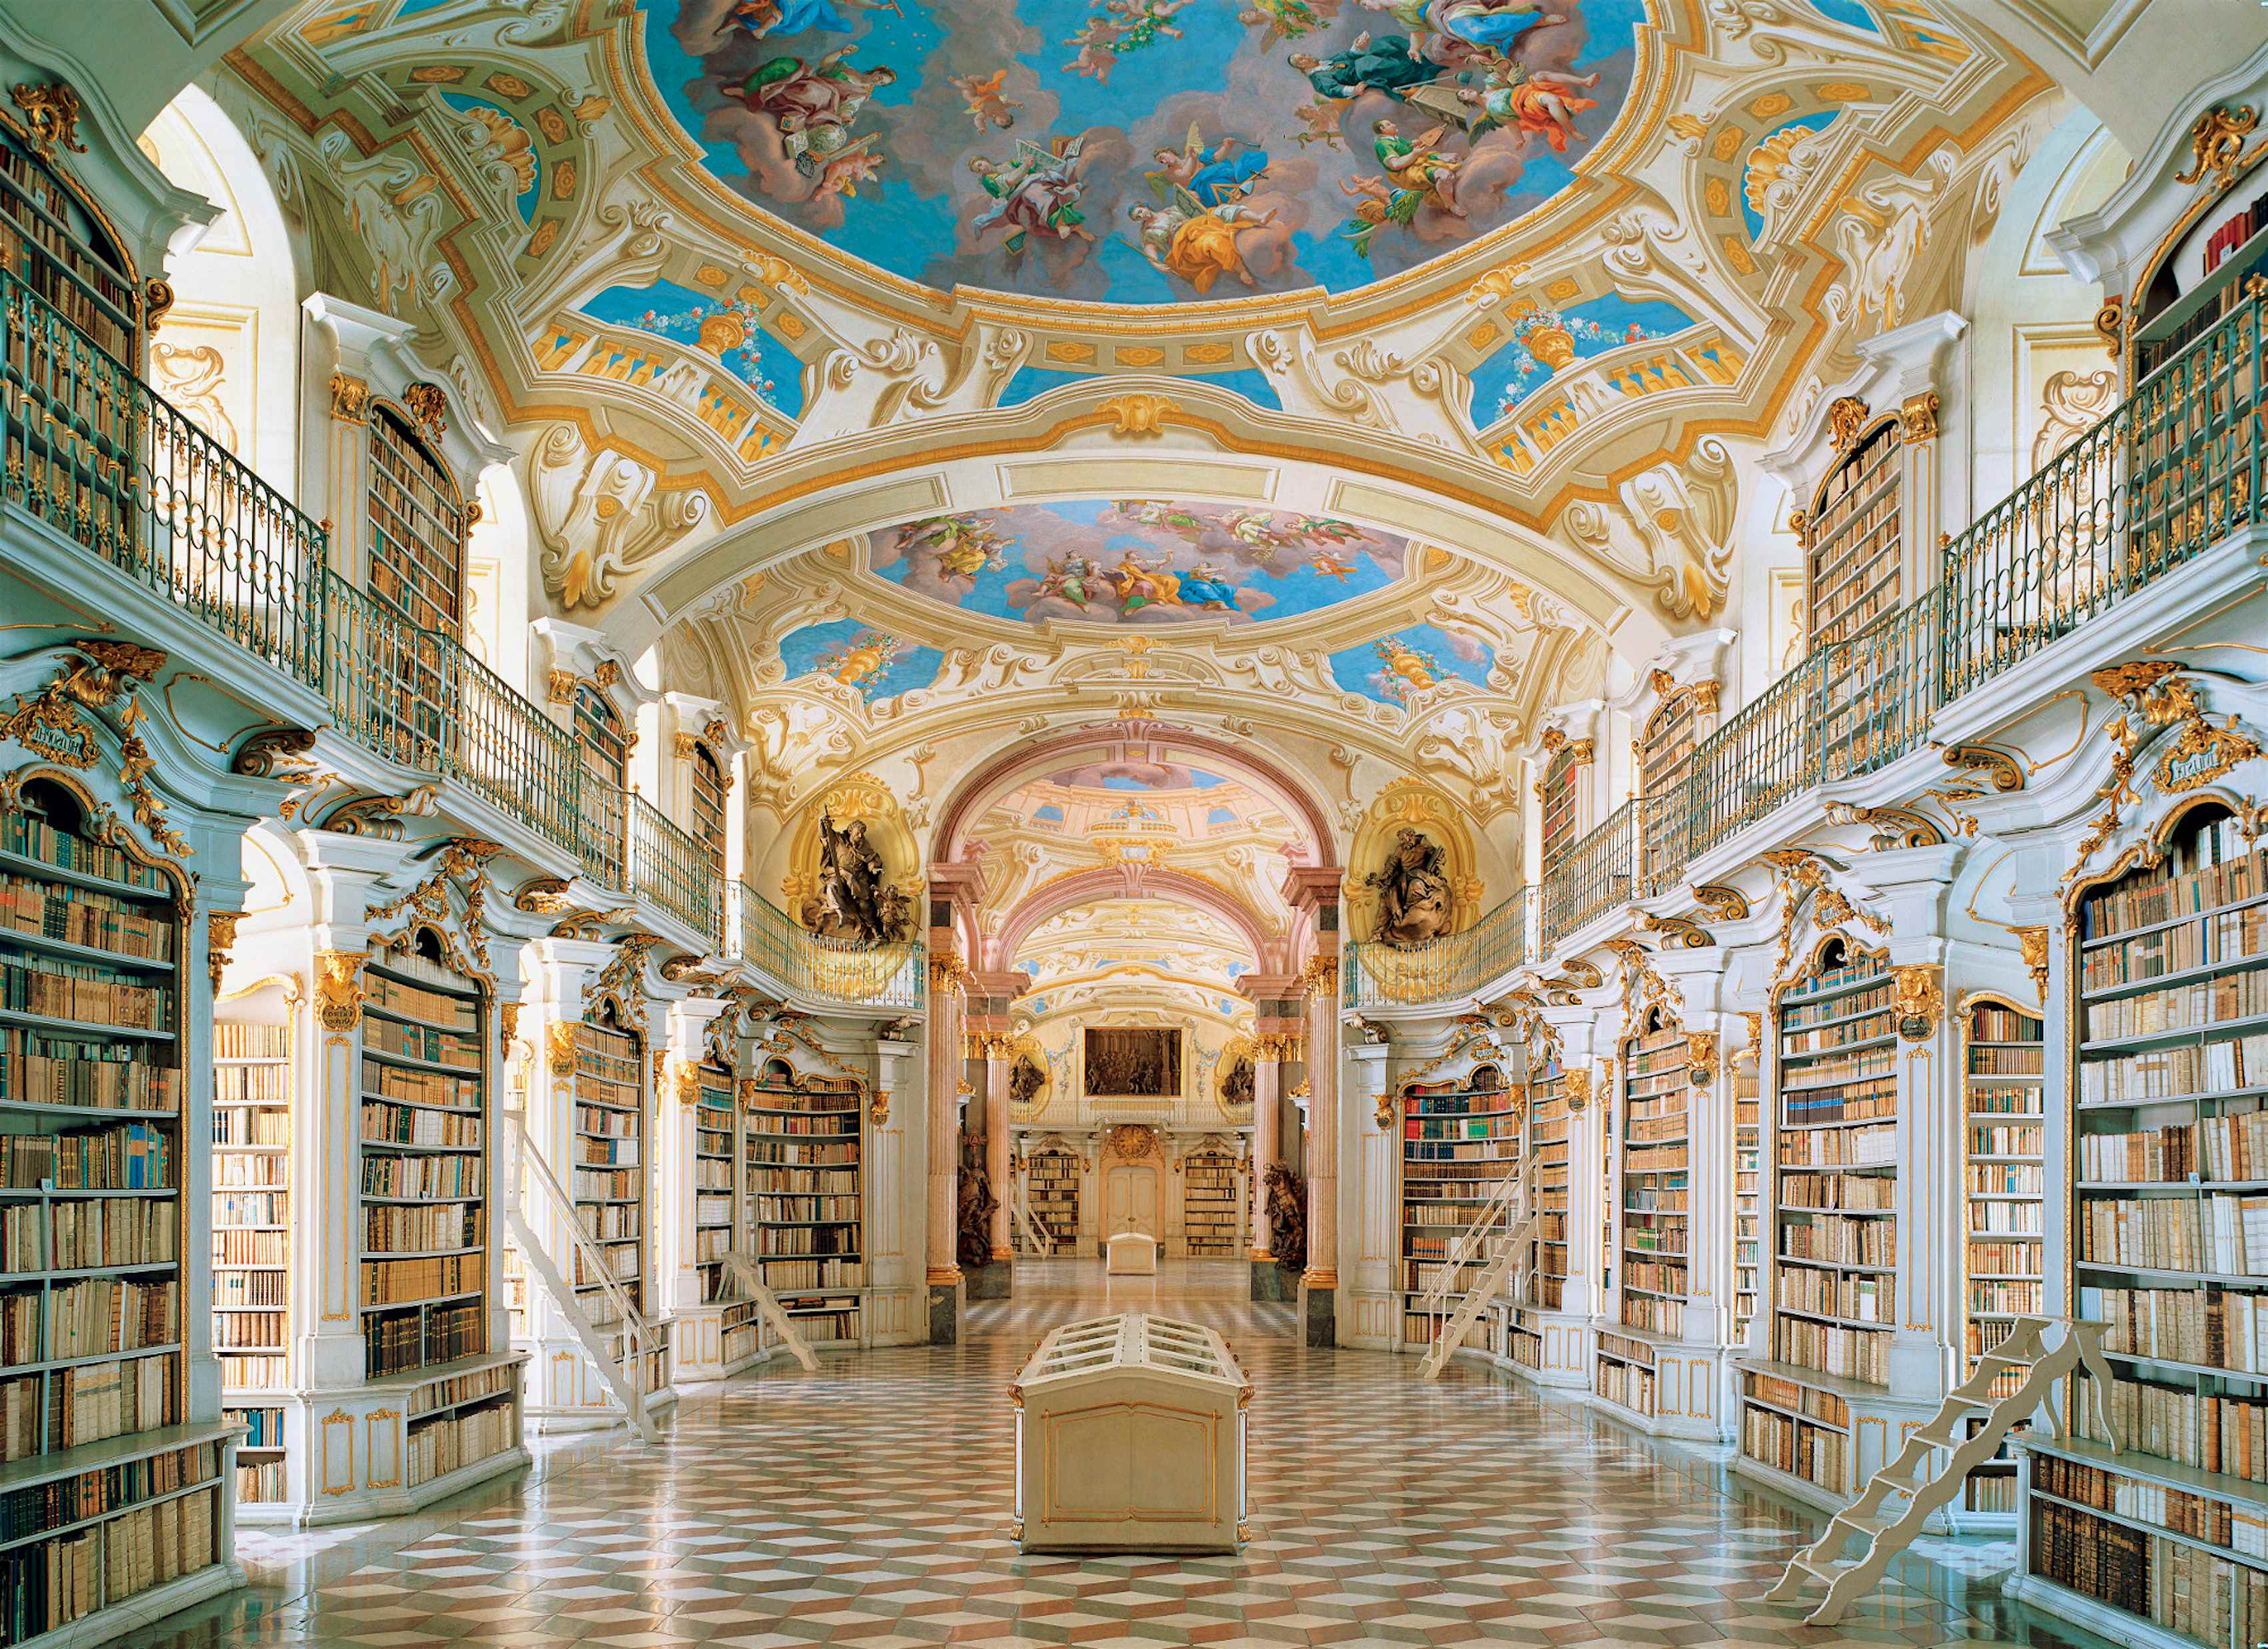 Europe’s most beautiful libraries - Lonely Planet